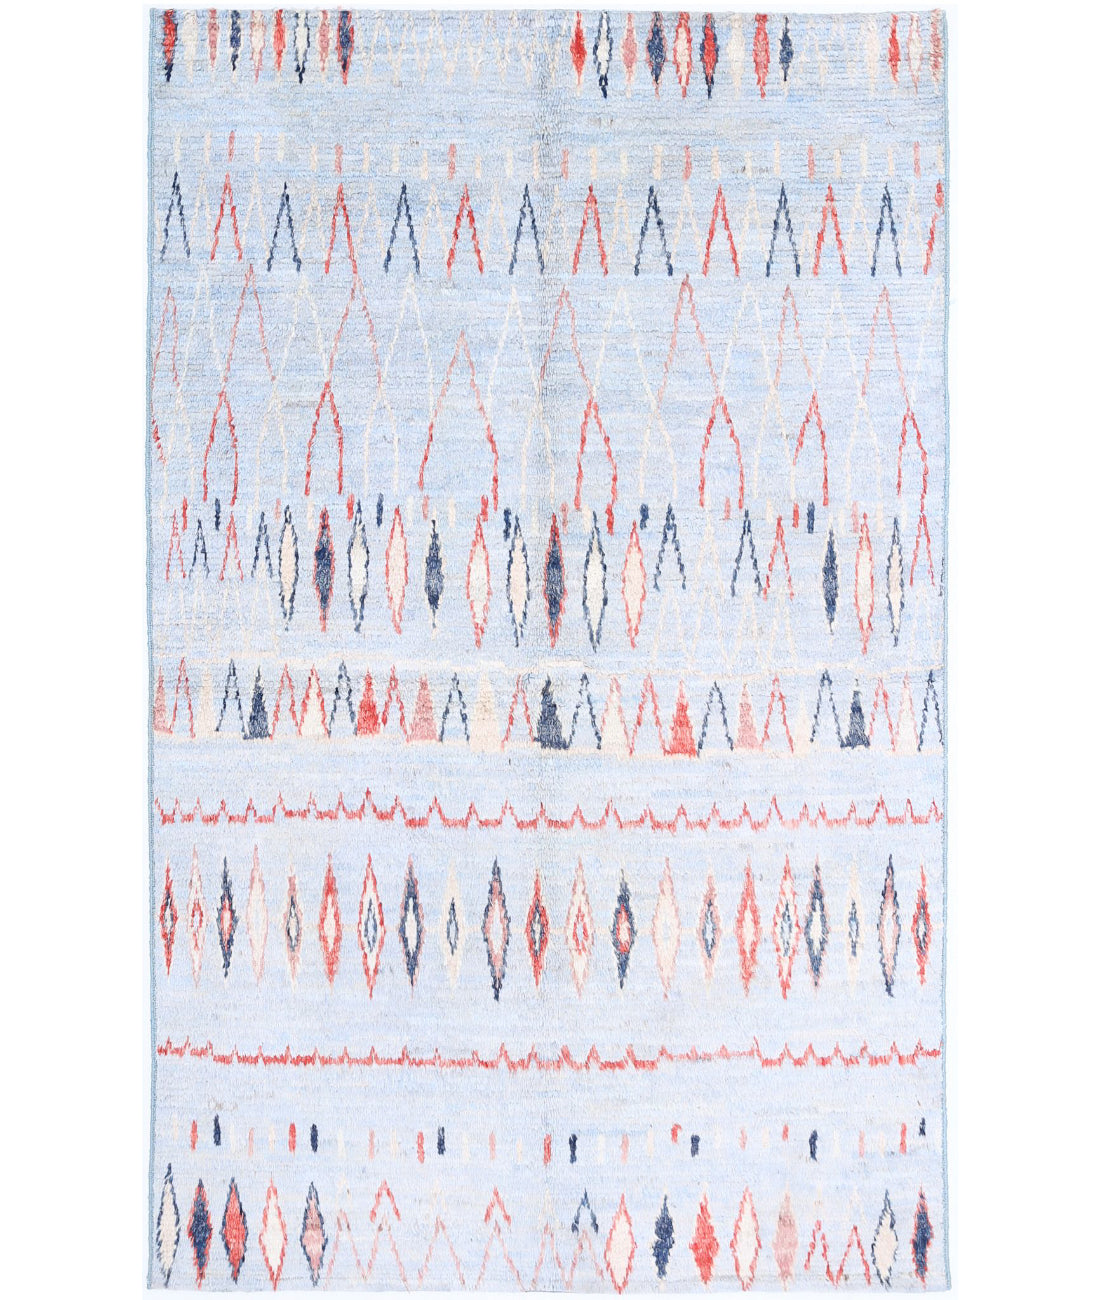 Hand Knotted Tribal Moroccan Wool Rug - 4'9'' x 7'9'' 4'9'' x 7'9'' (143 X 233) / Blue / Red